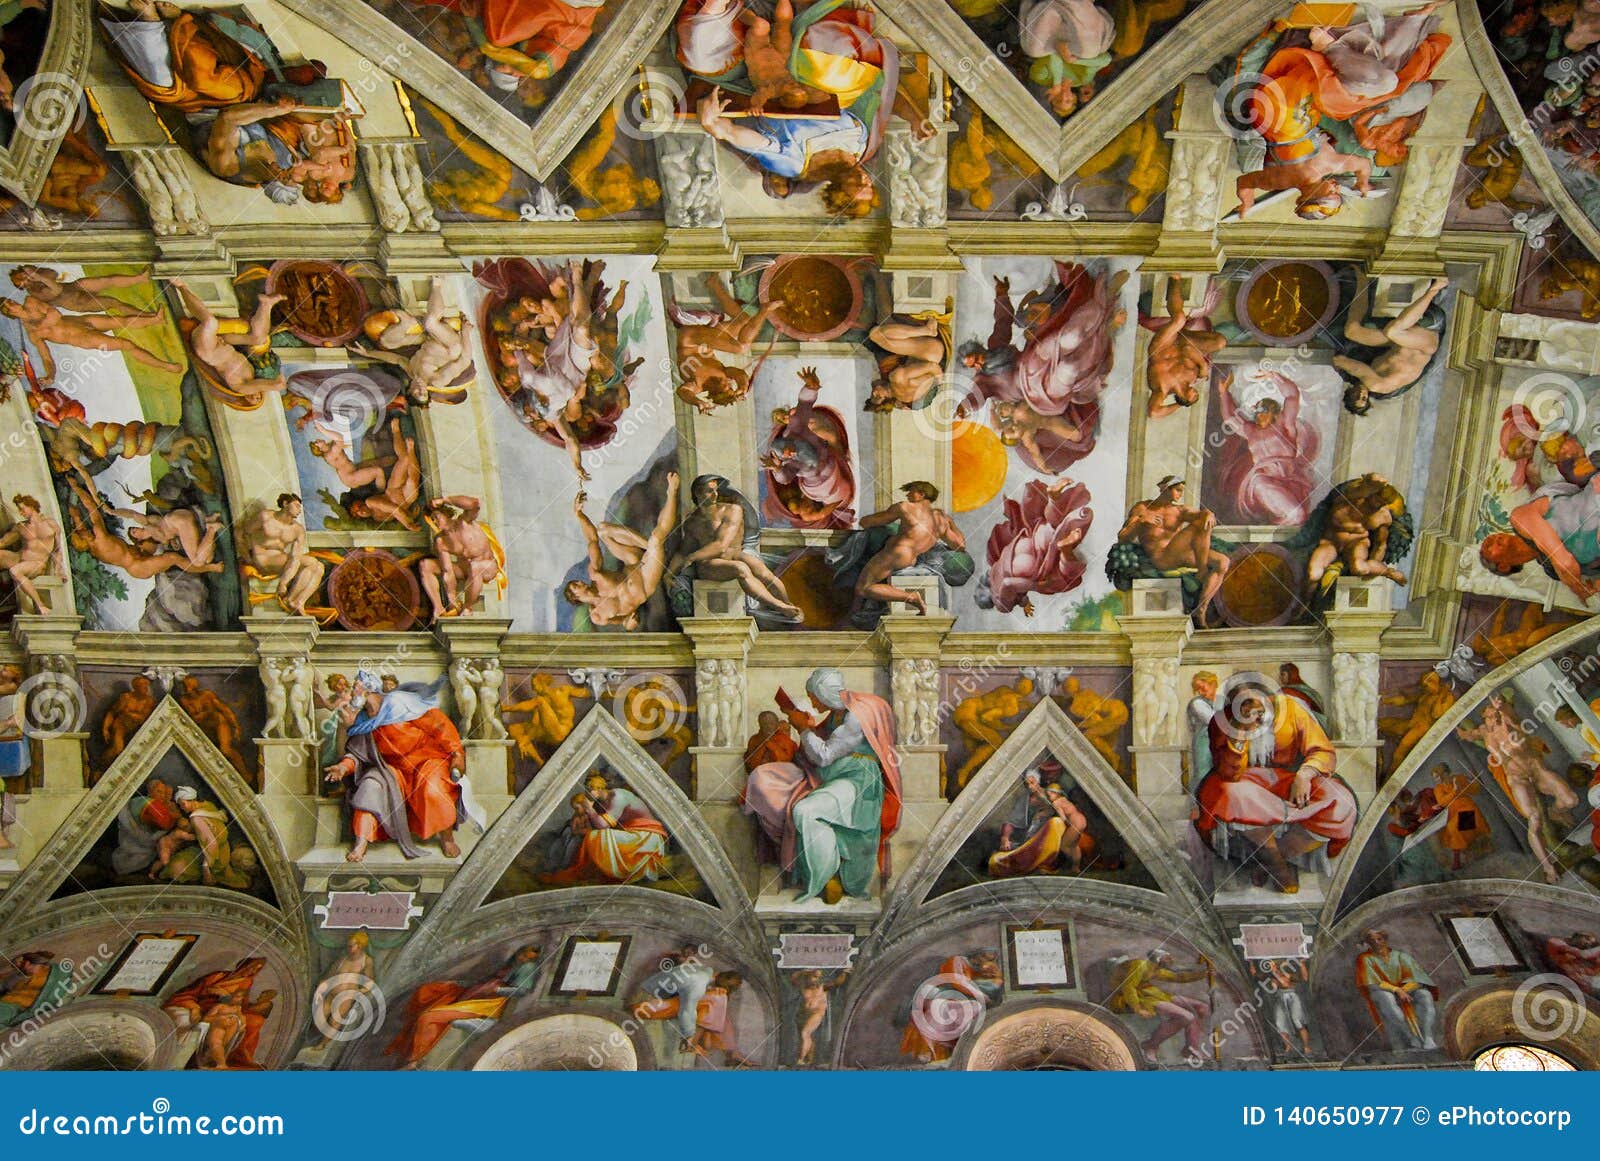 Sistine Chapel Ceiling Vatican City Italy Editorial Photography